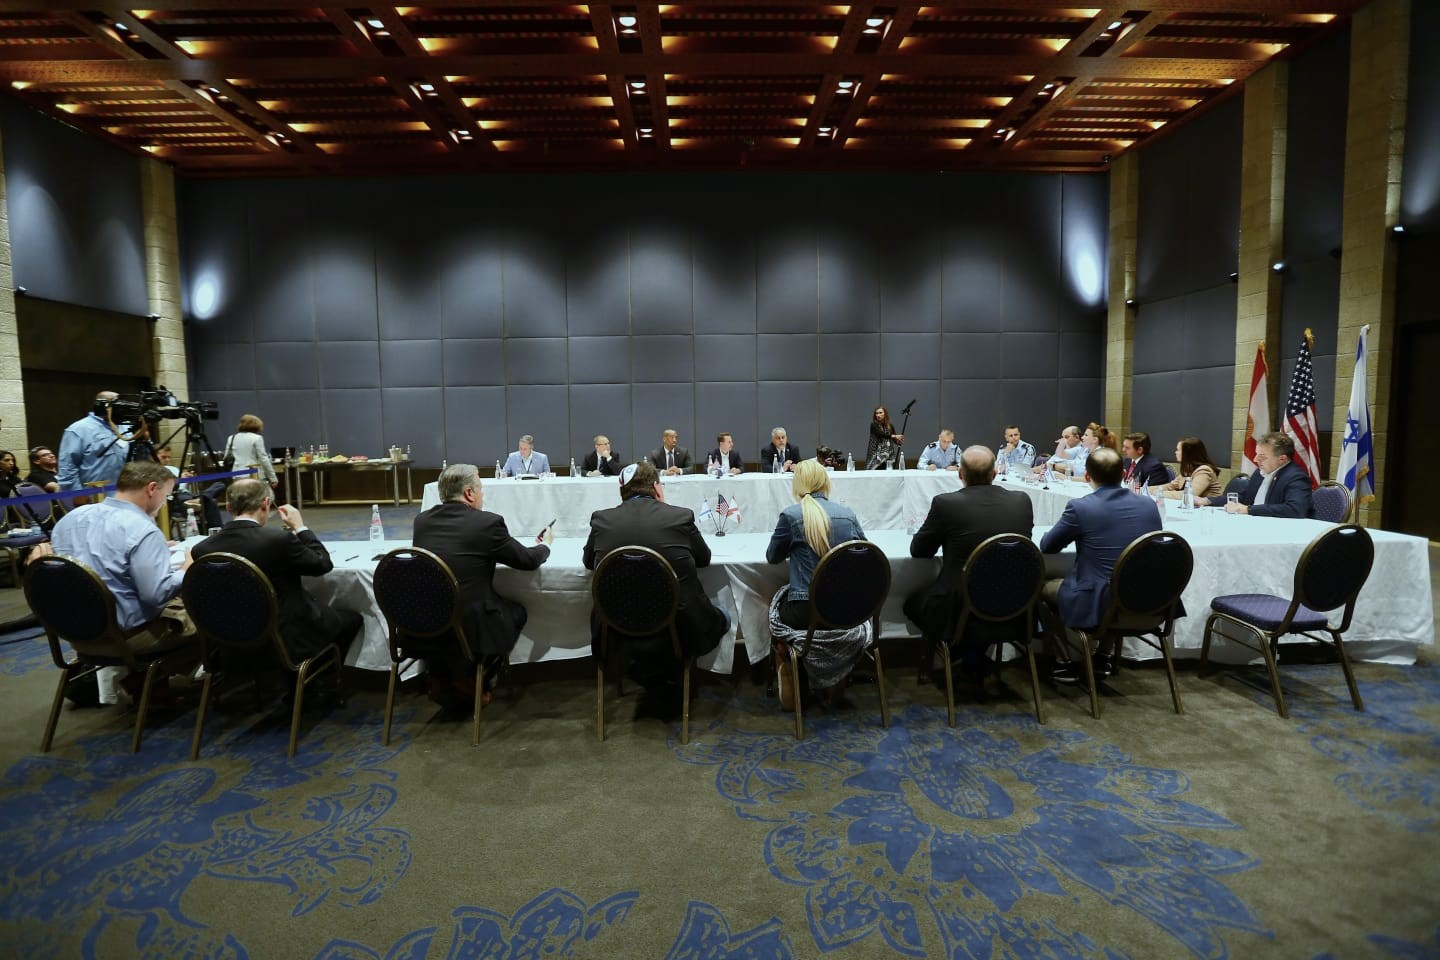   Governor Ron DeSantis Leads Roundtable Discussion on School Safety and Security in Jerusalem